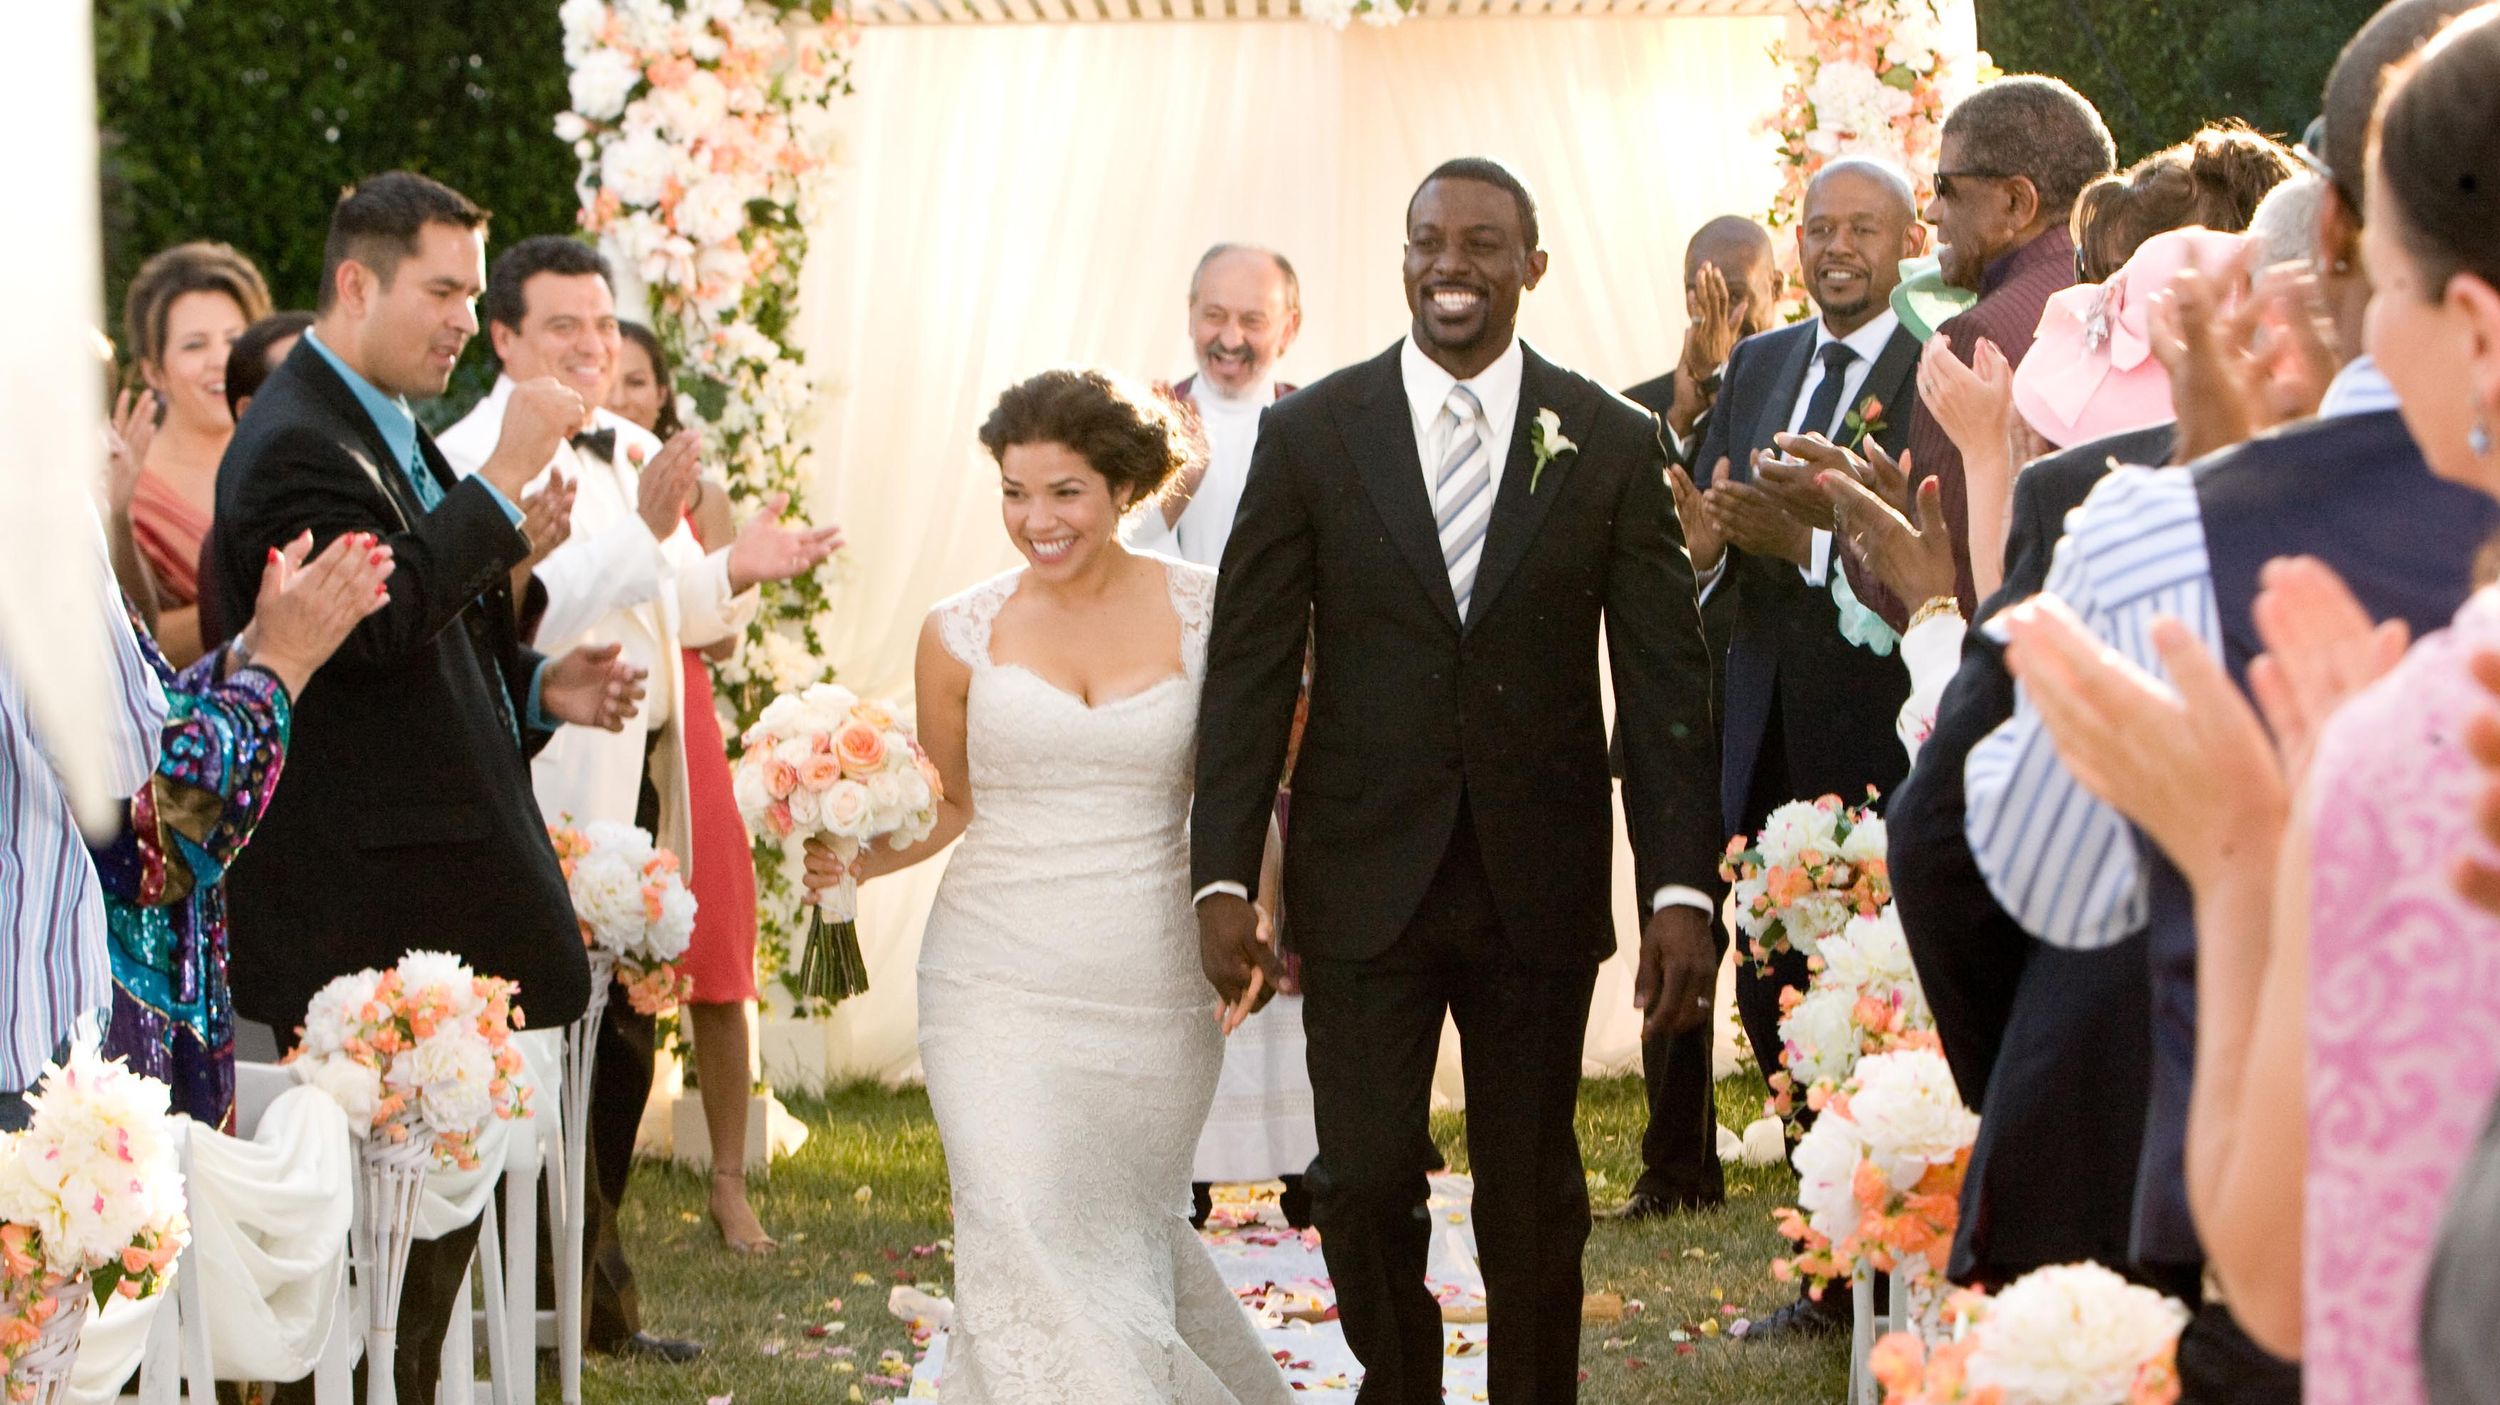 Review: `Our Family Wedding' surpasses stereotype - The San Diego